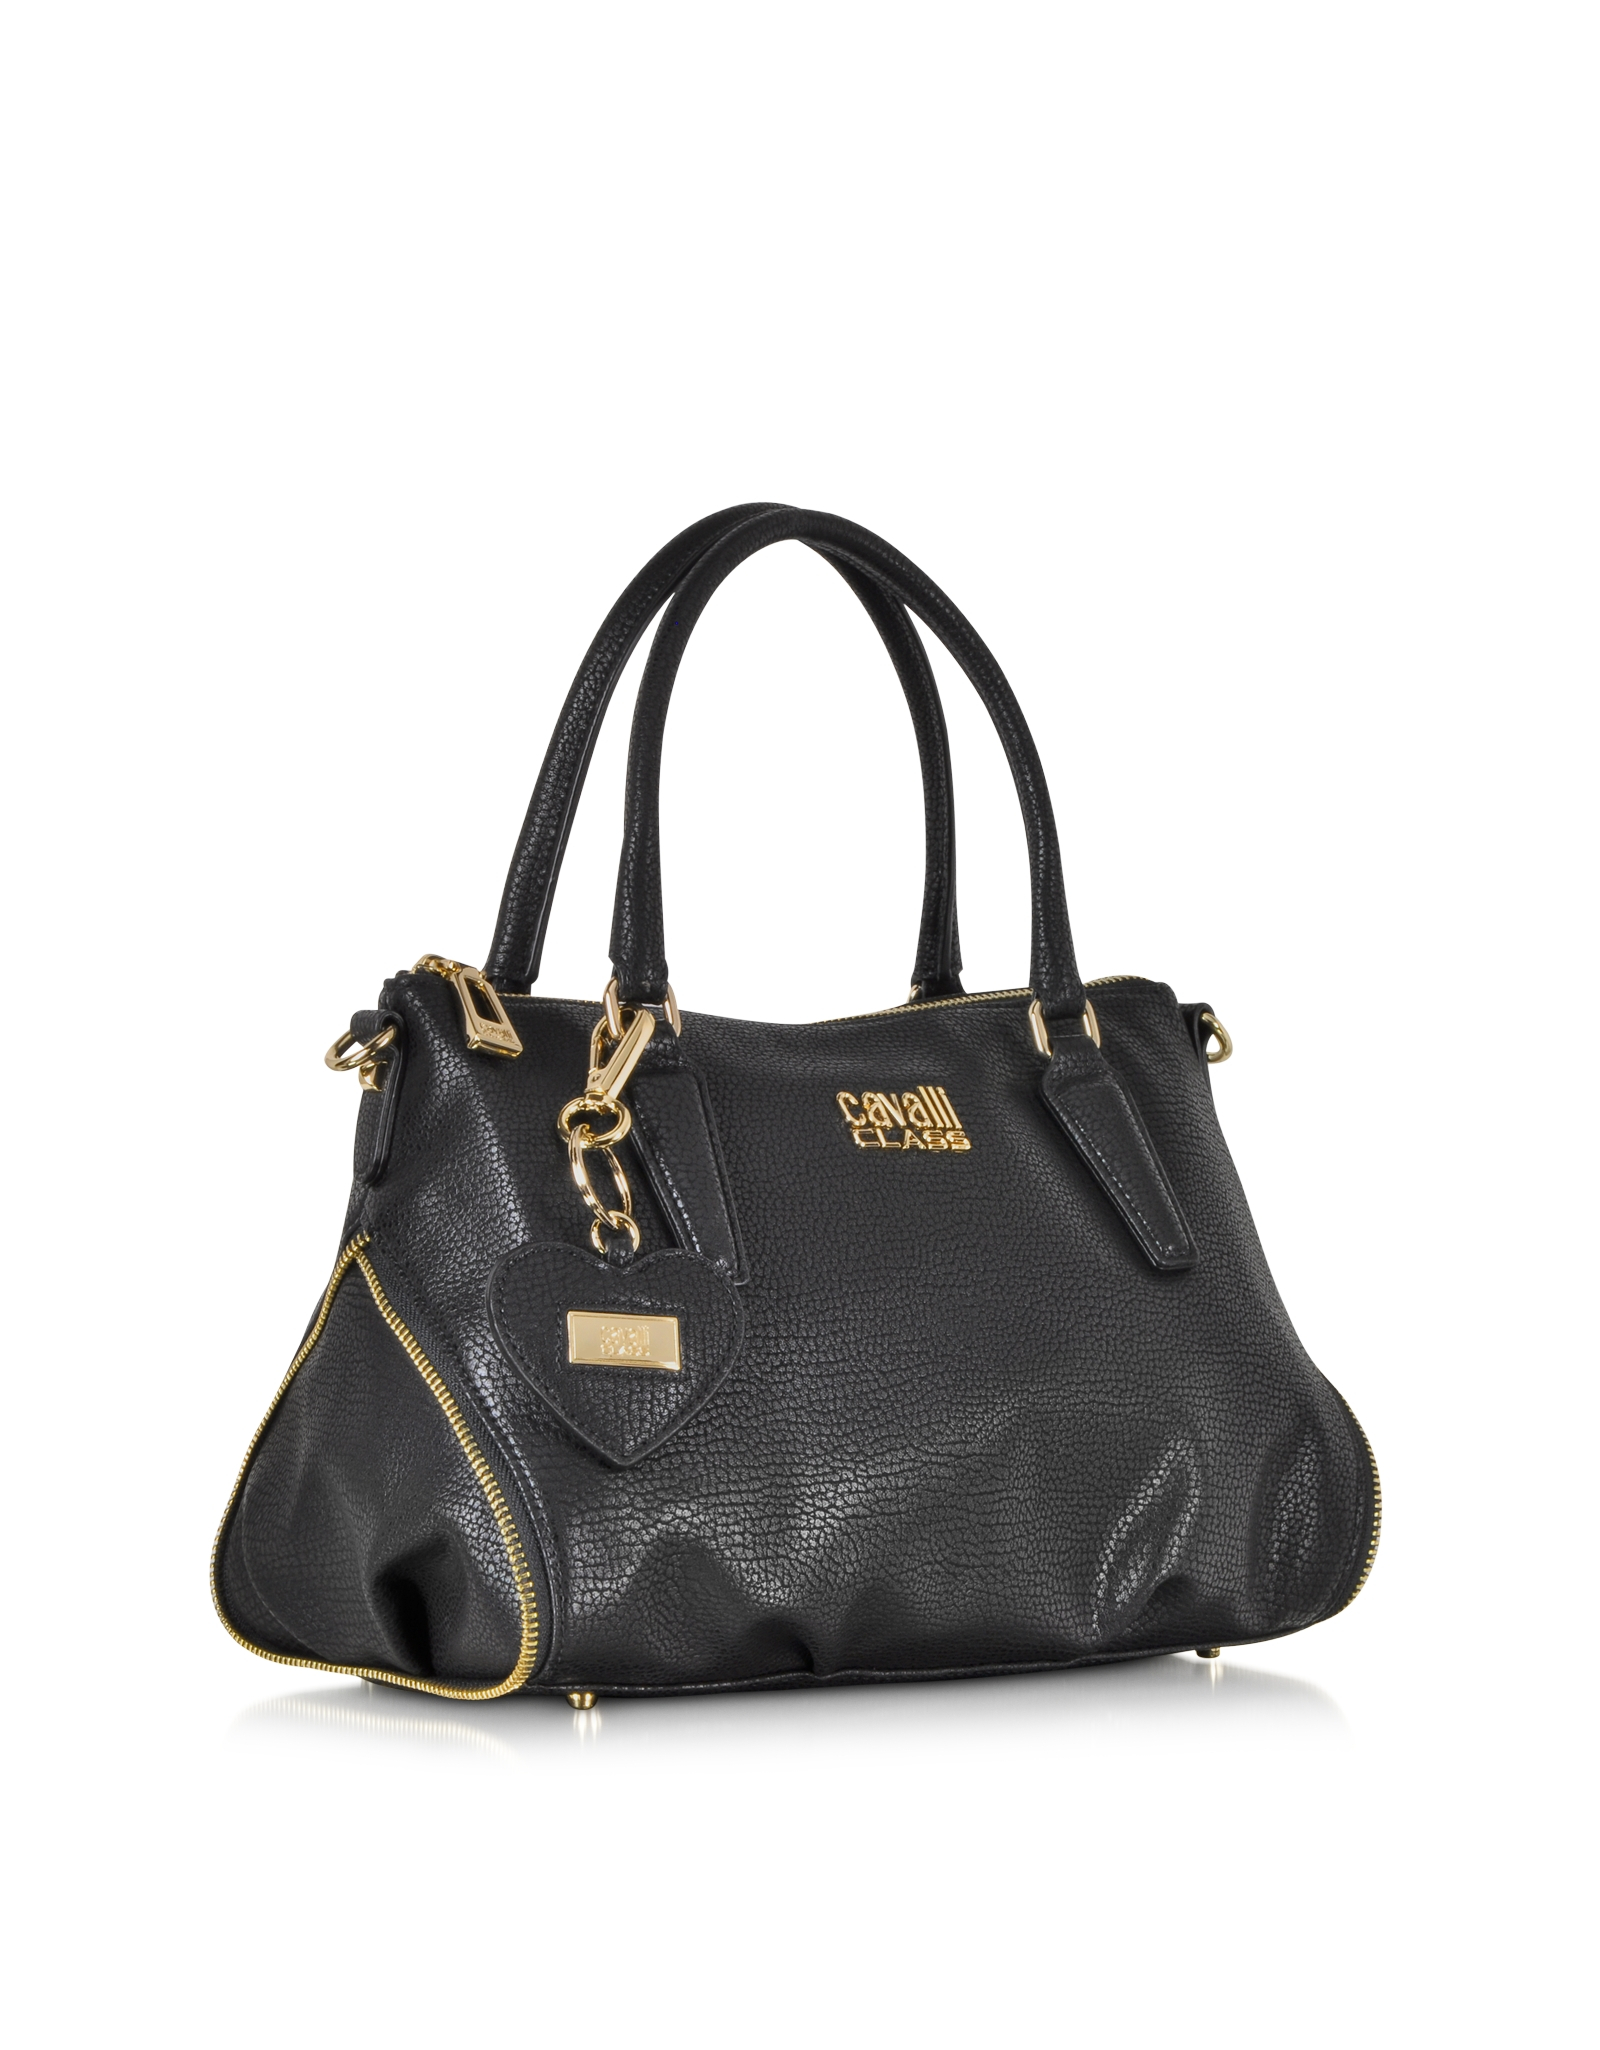 Lyst - Class Roberto Cavalli Isabeli Black Eco Leather Bowling Bag in Black